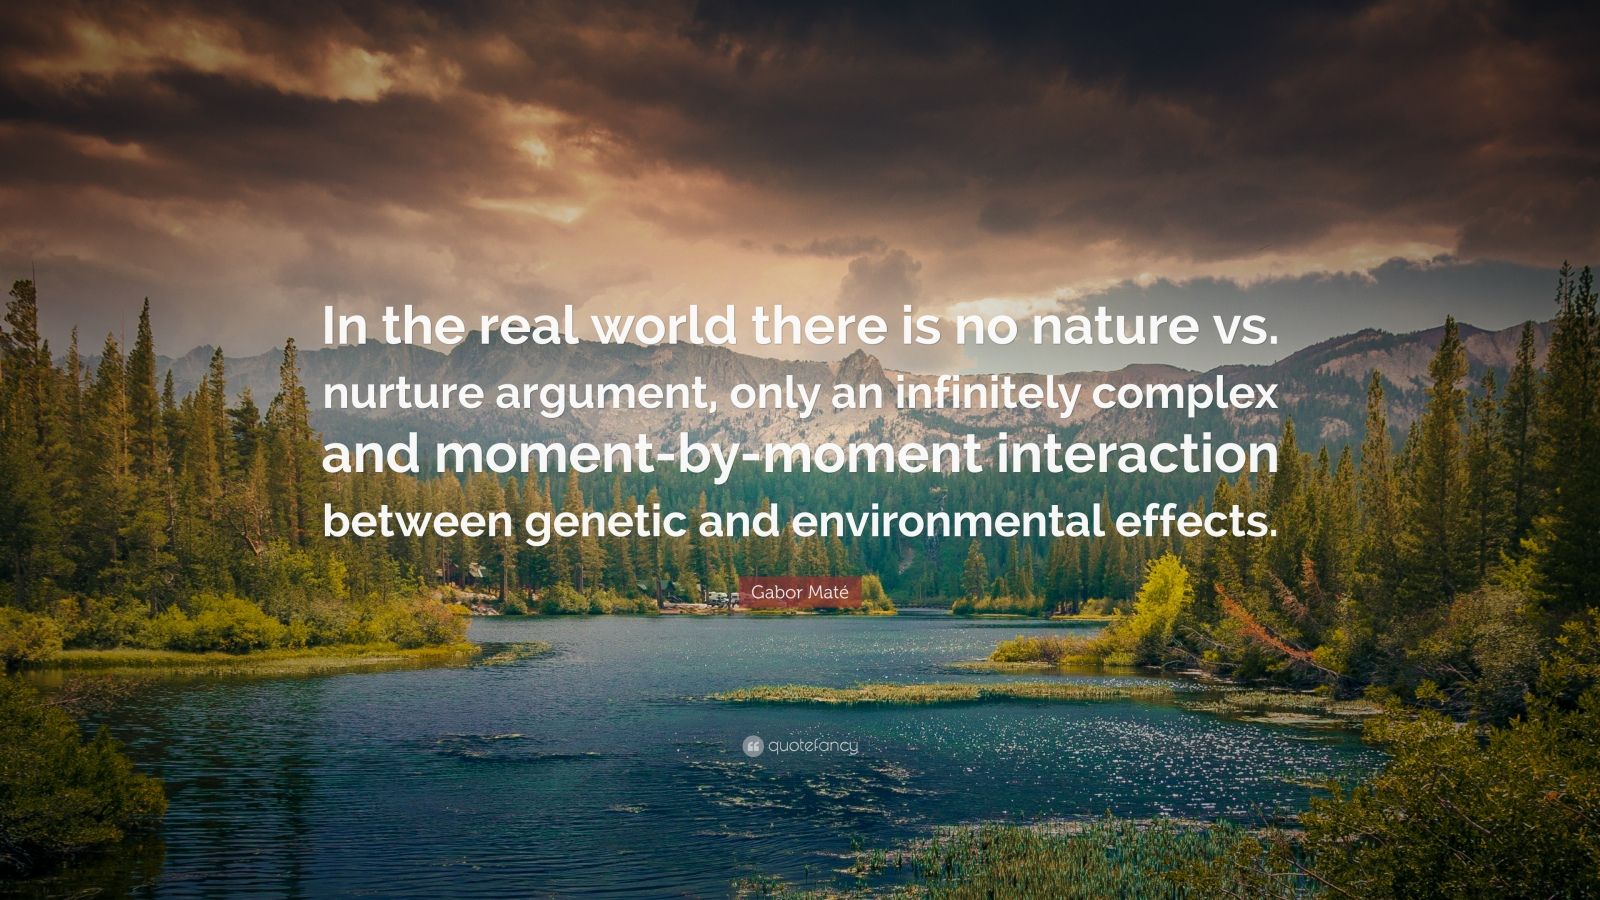 Gabor Maté Quote: “In the real world there is no nature vs. nurture